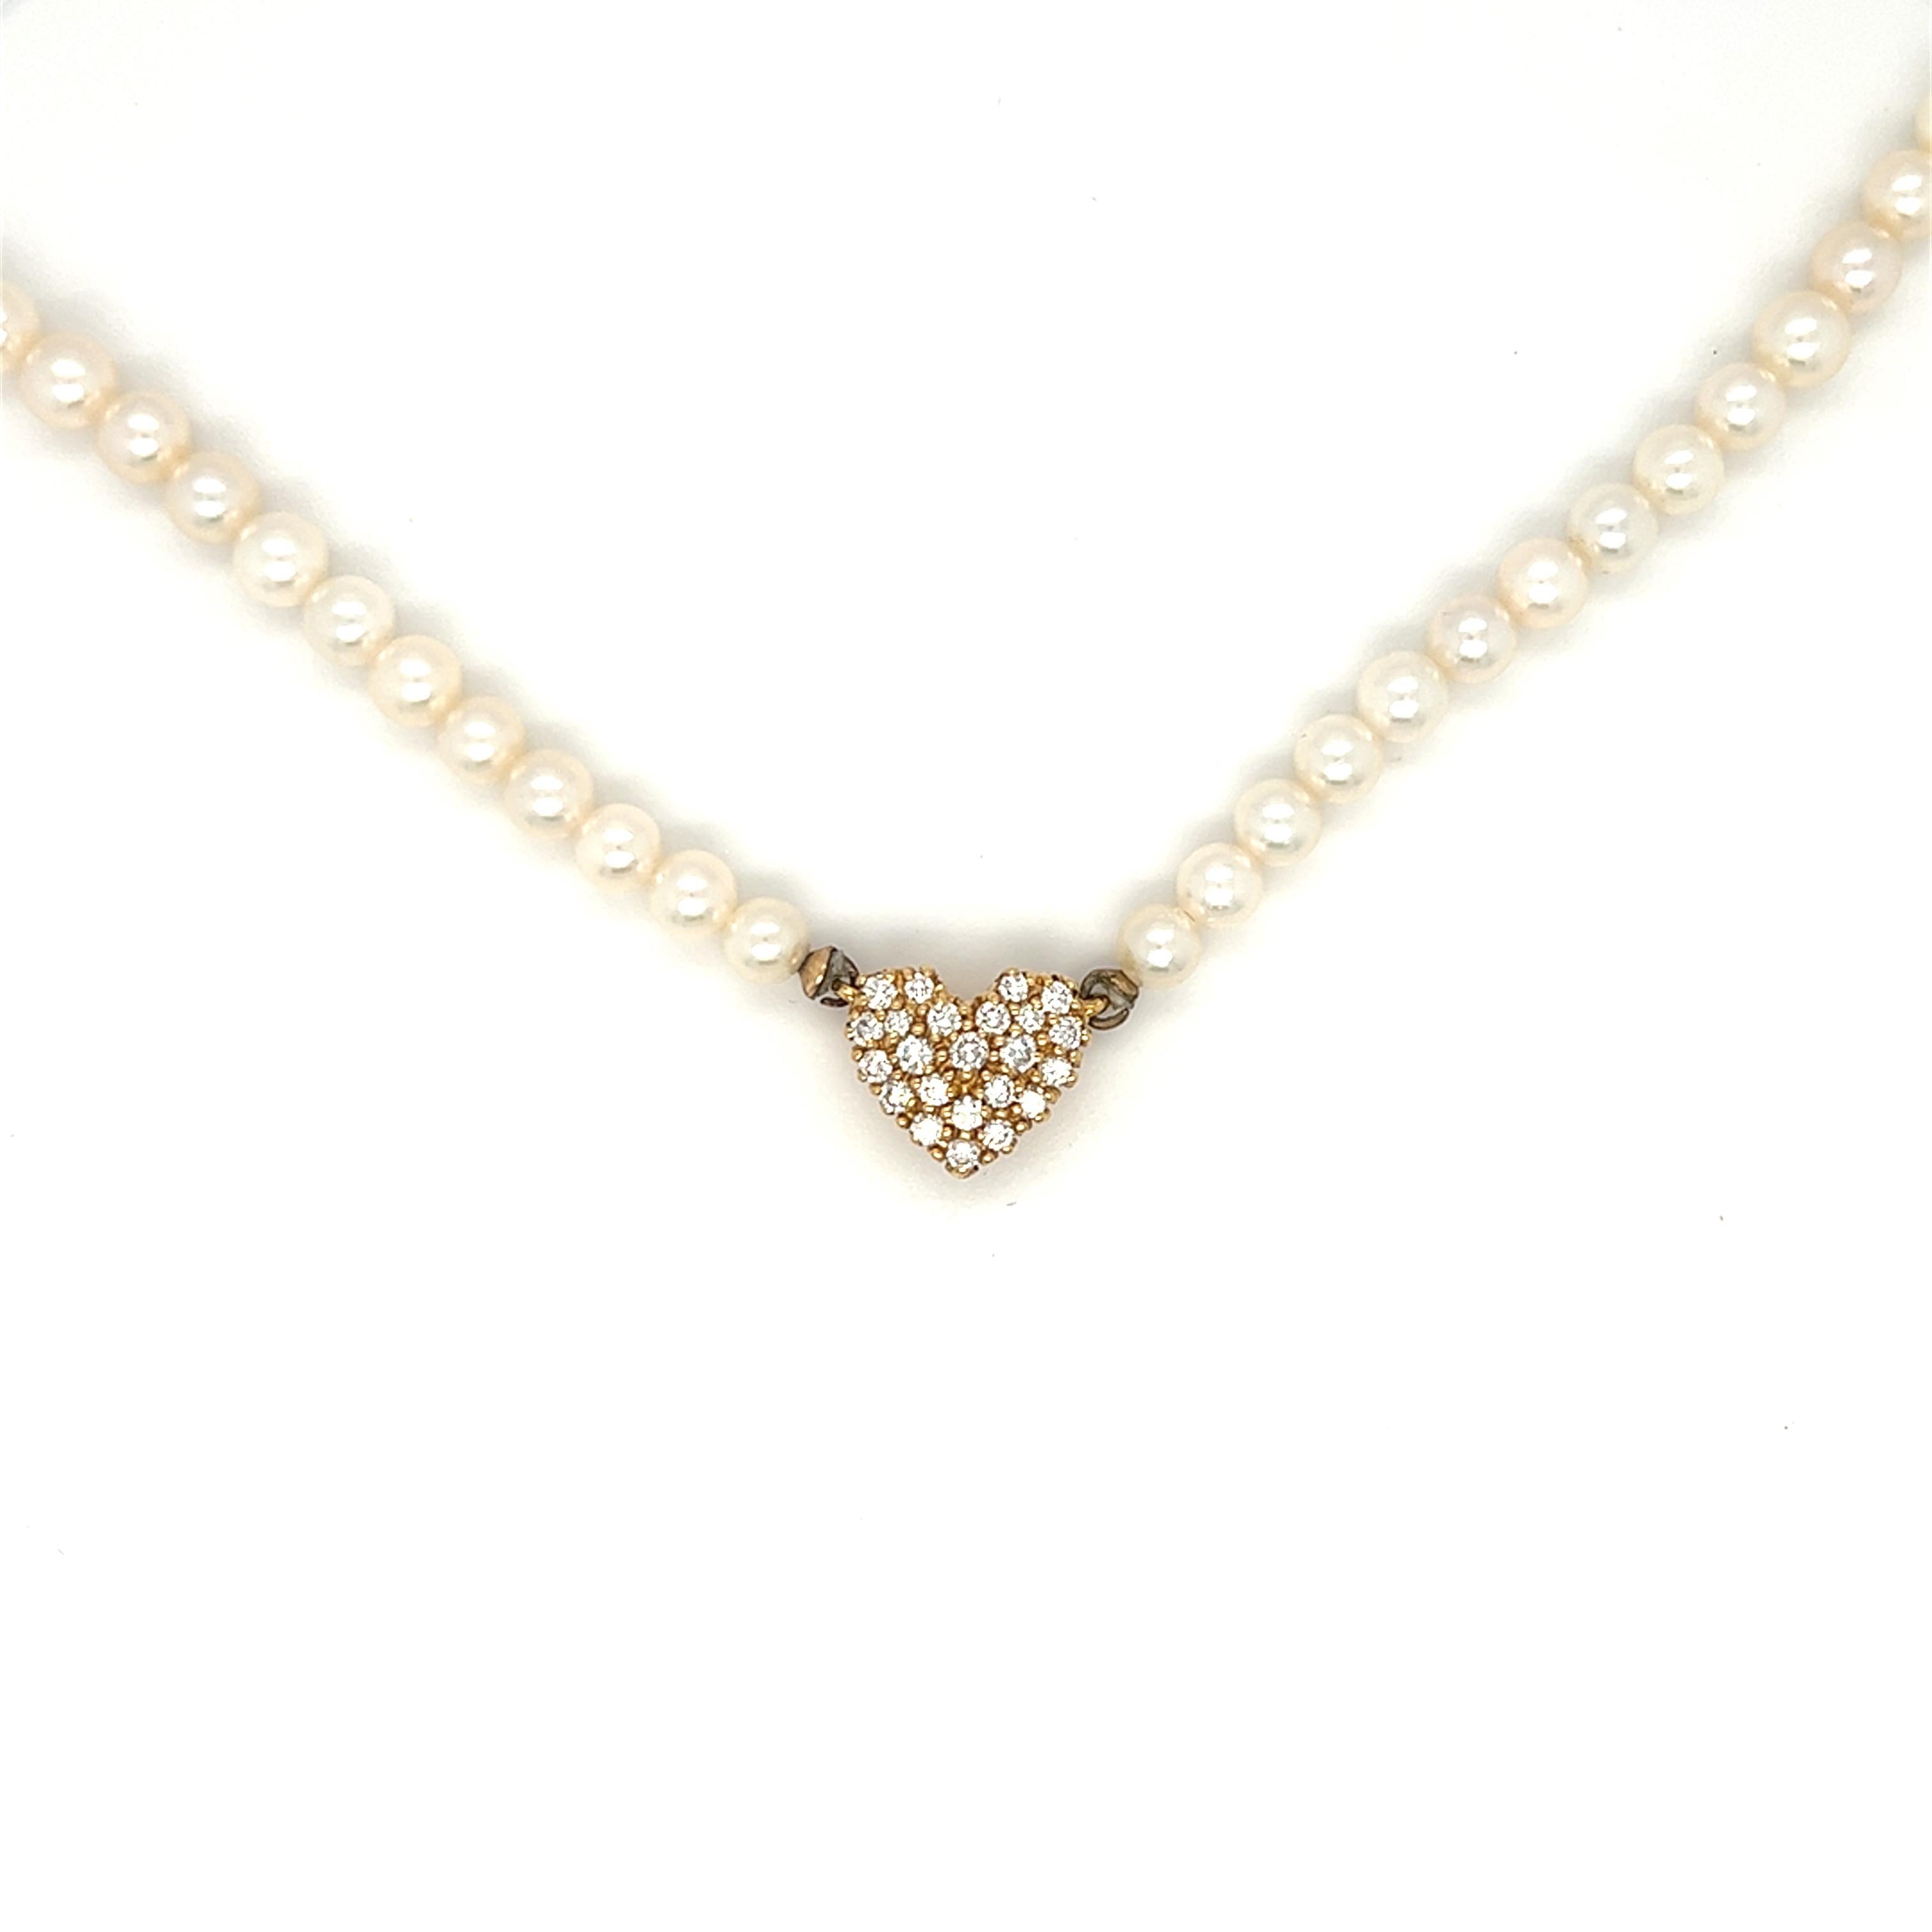 A very pretty cluster diamond heart charm pendant affixed to a luscious strand of cultured pearls. The heart carries total weight of 1.00 carat round brilliant diamond with G-H color and VS2 clarity. The heart charm is stamped 18KP. The necklace